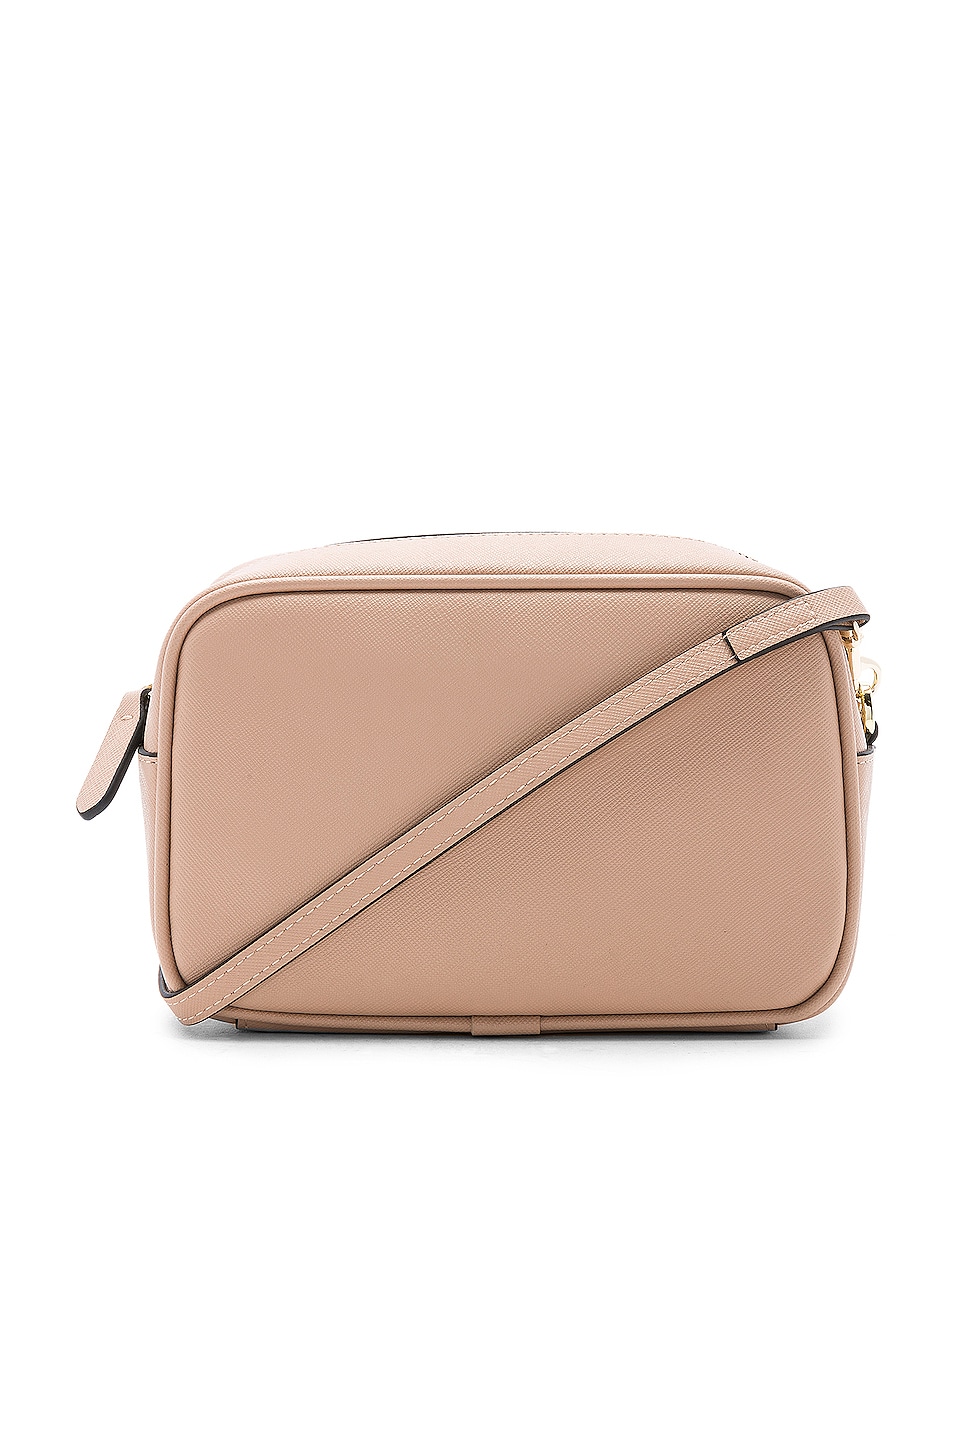 the daily edited Mini Cross Body Bag in Taupe | REVOLVE